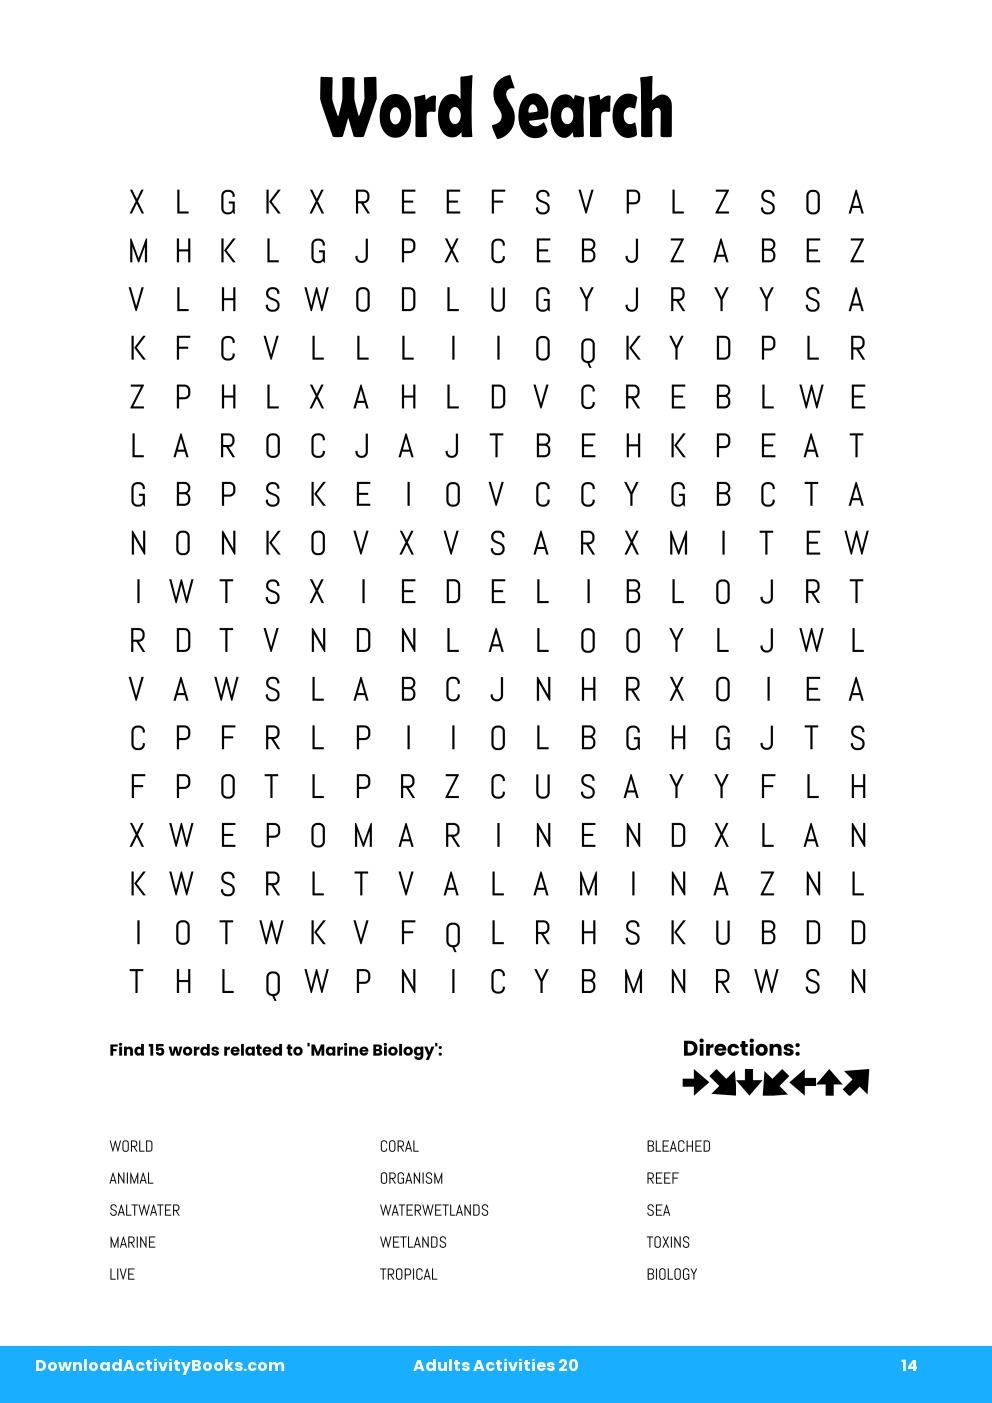 Word Search in Adults Activities 20